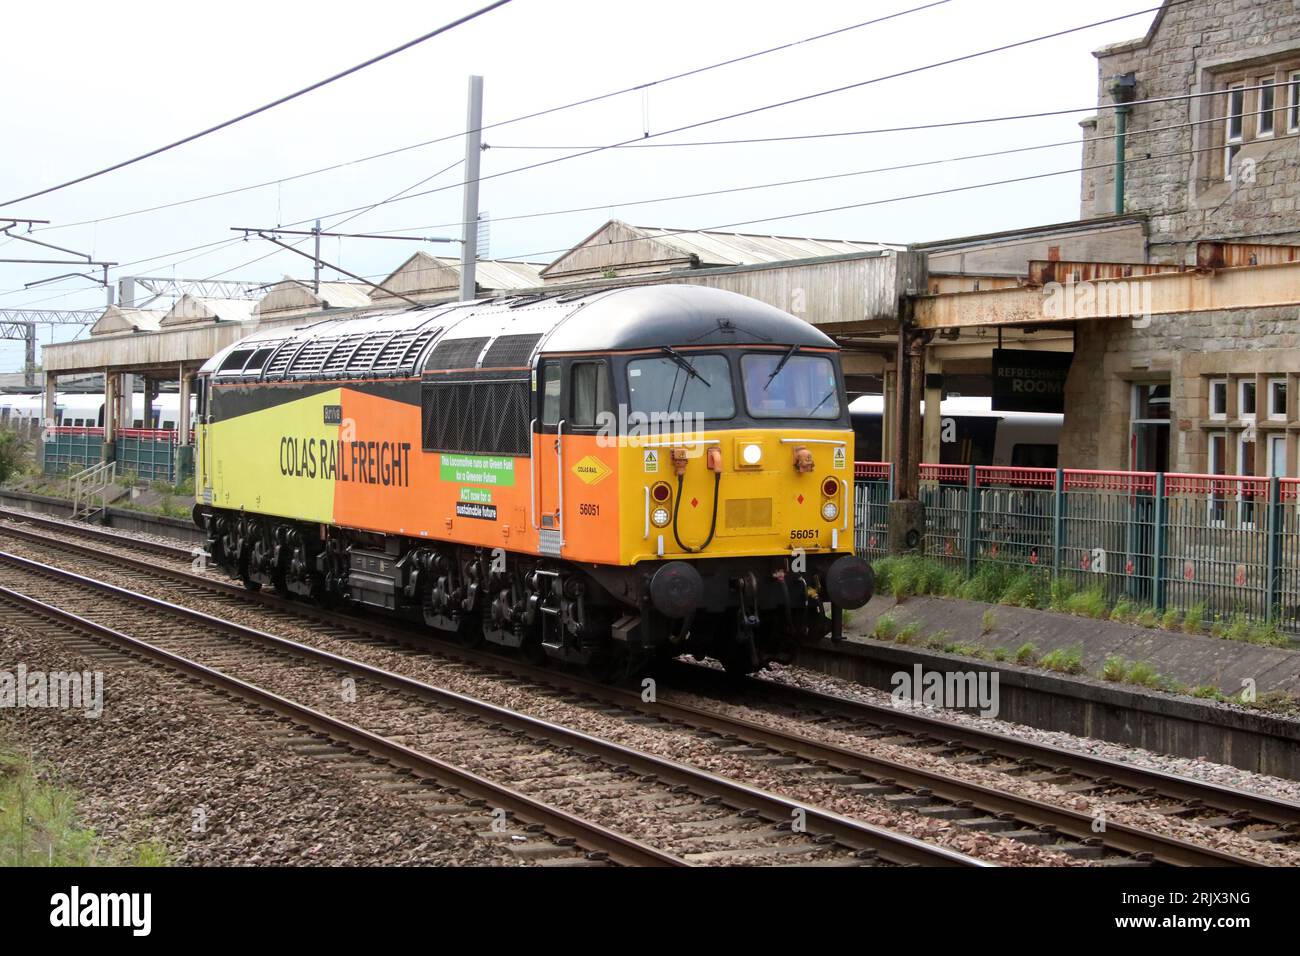 Green Fuel class 56 grid diesel-electric loco in Colas Rail Freight orange and yellow livery on West Coast Main Line, Carnforth, 23rd August 2023. Stock Photo